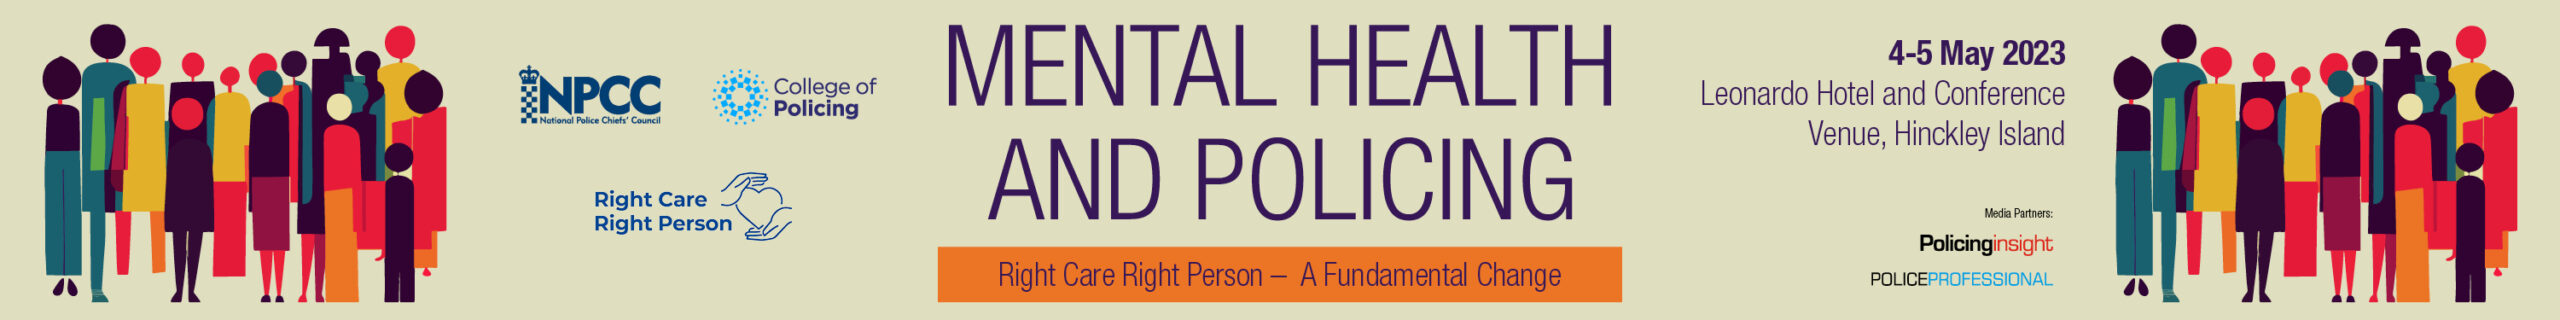 Mental Health and Policing National Conference 2023